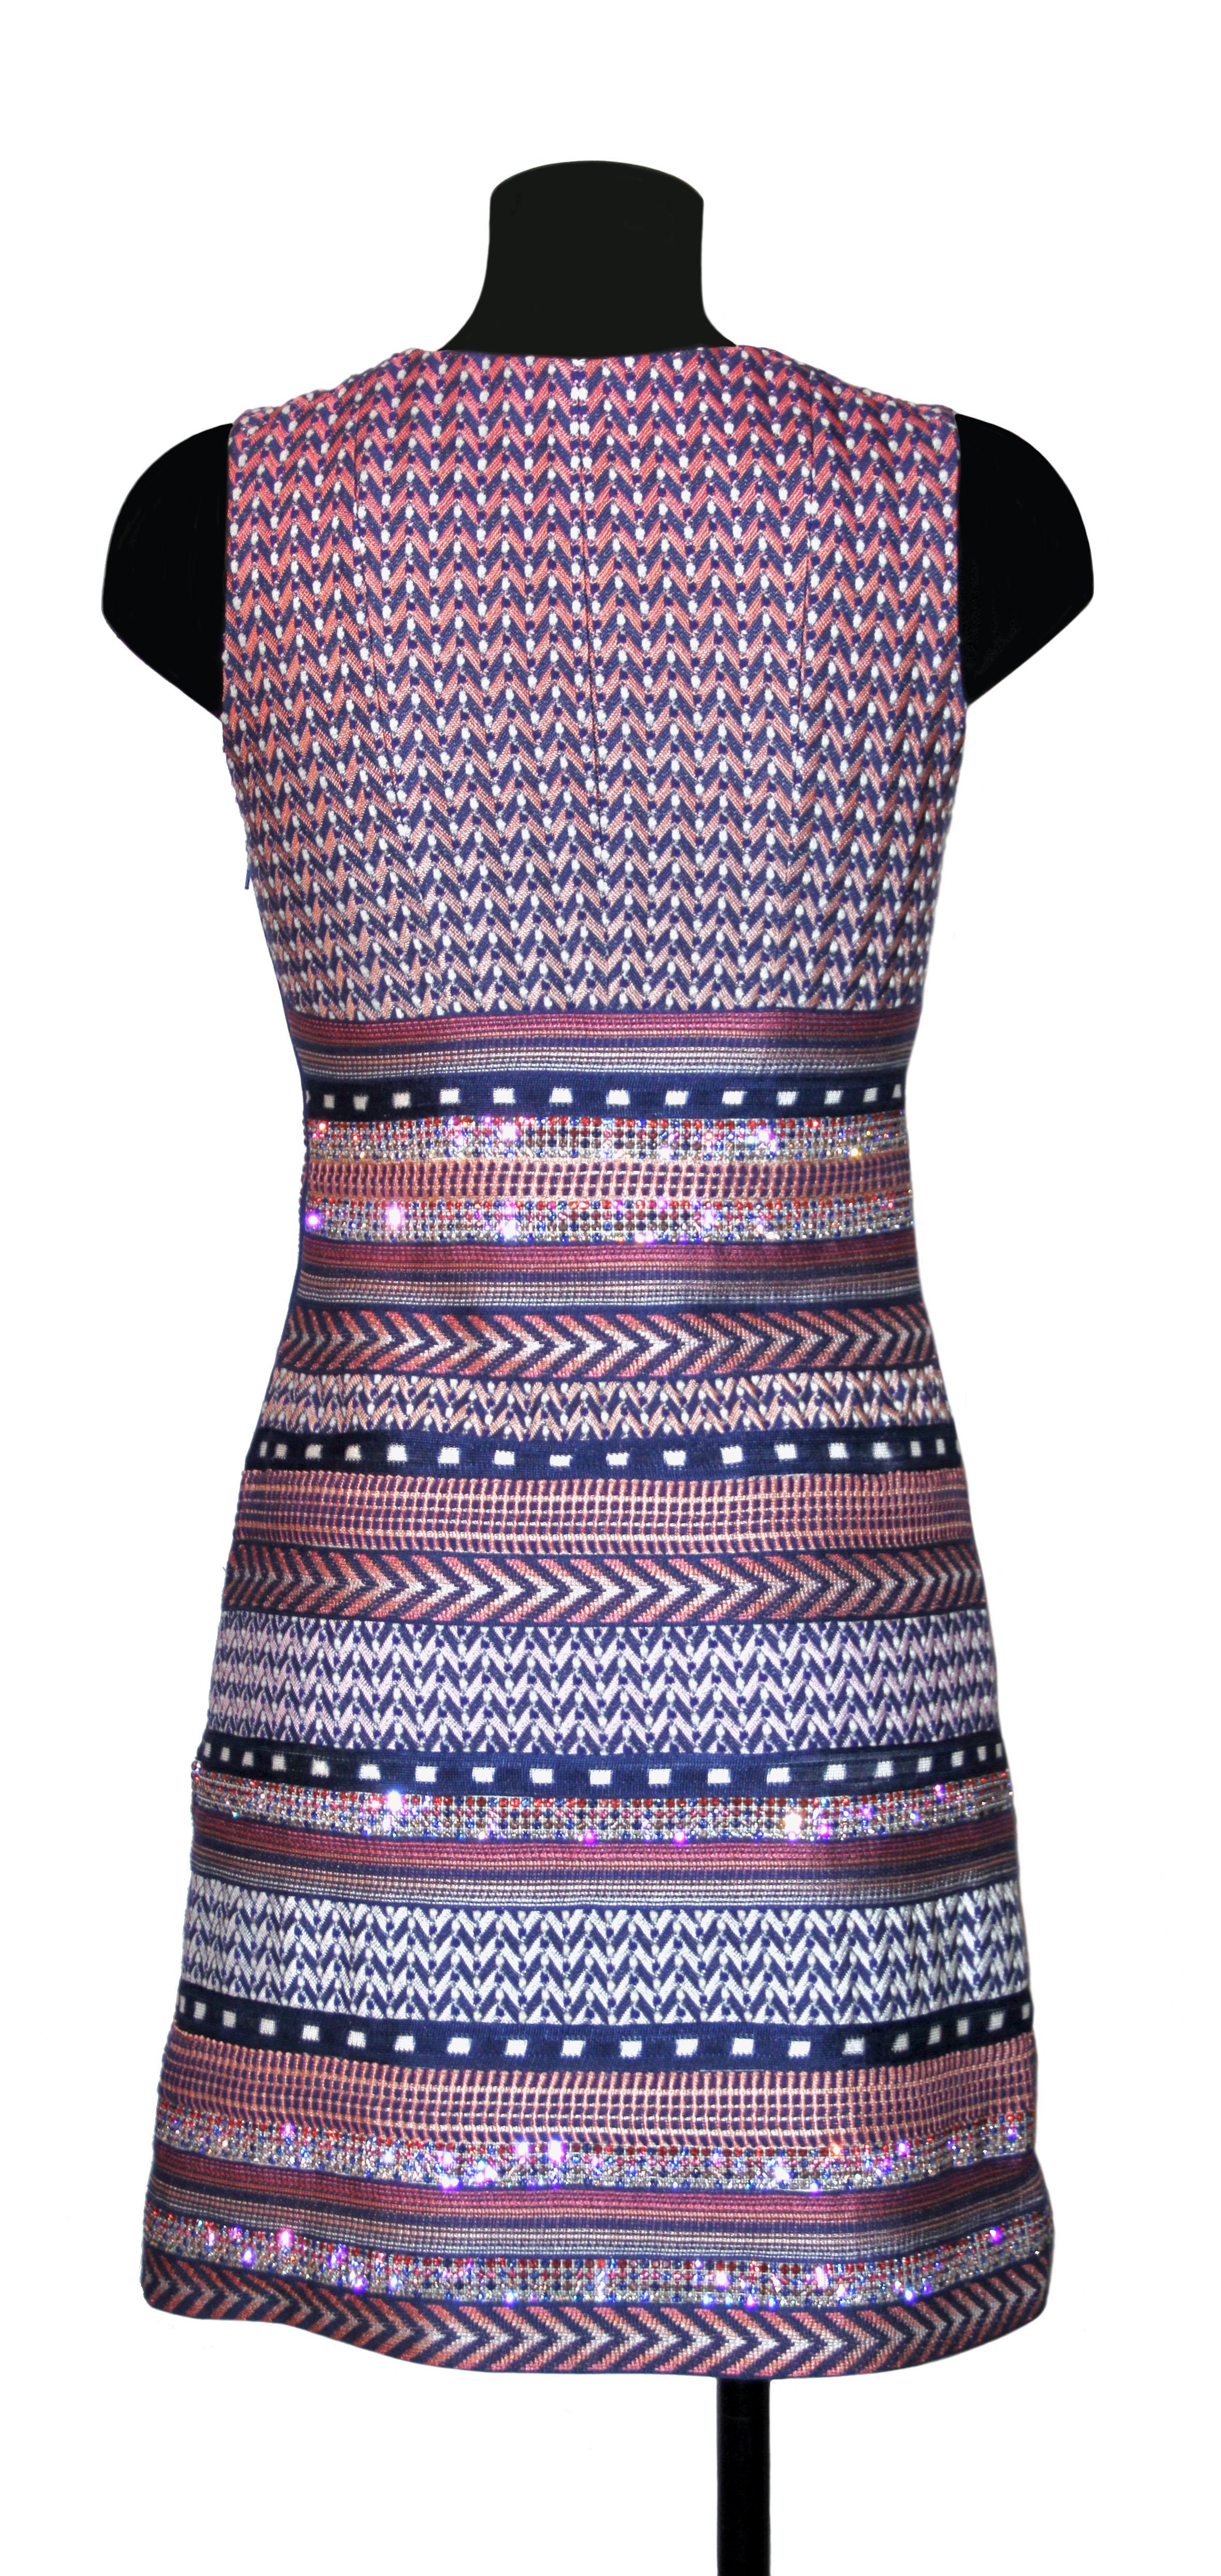 Very chic round-neck and sleeveless dress from the house of Missoni.
Crafted in a multicolor fabric with stripes design of colors and strass.

Fabric: 70% rayon, 28% cotton, 2% wool
Lining: 97% polyester, 3% elasthane
Color: multicolor
Size: